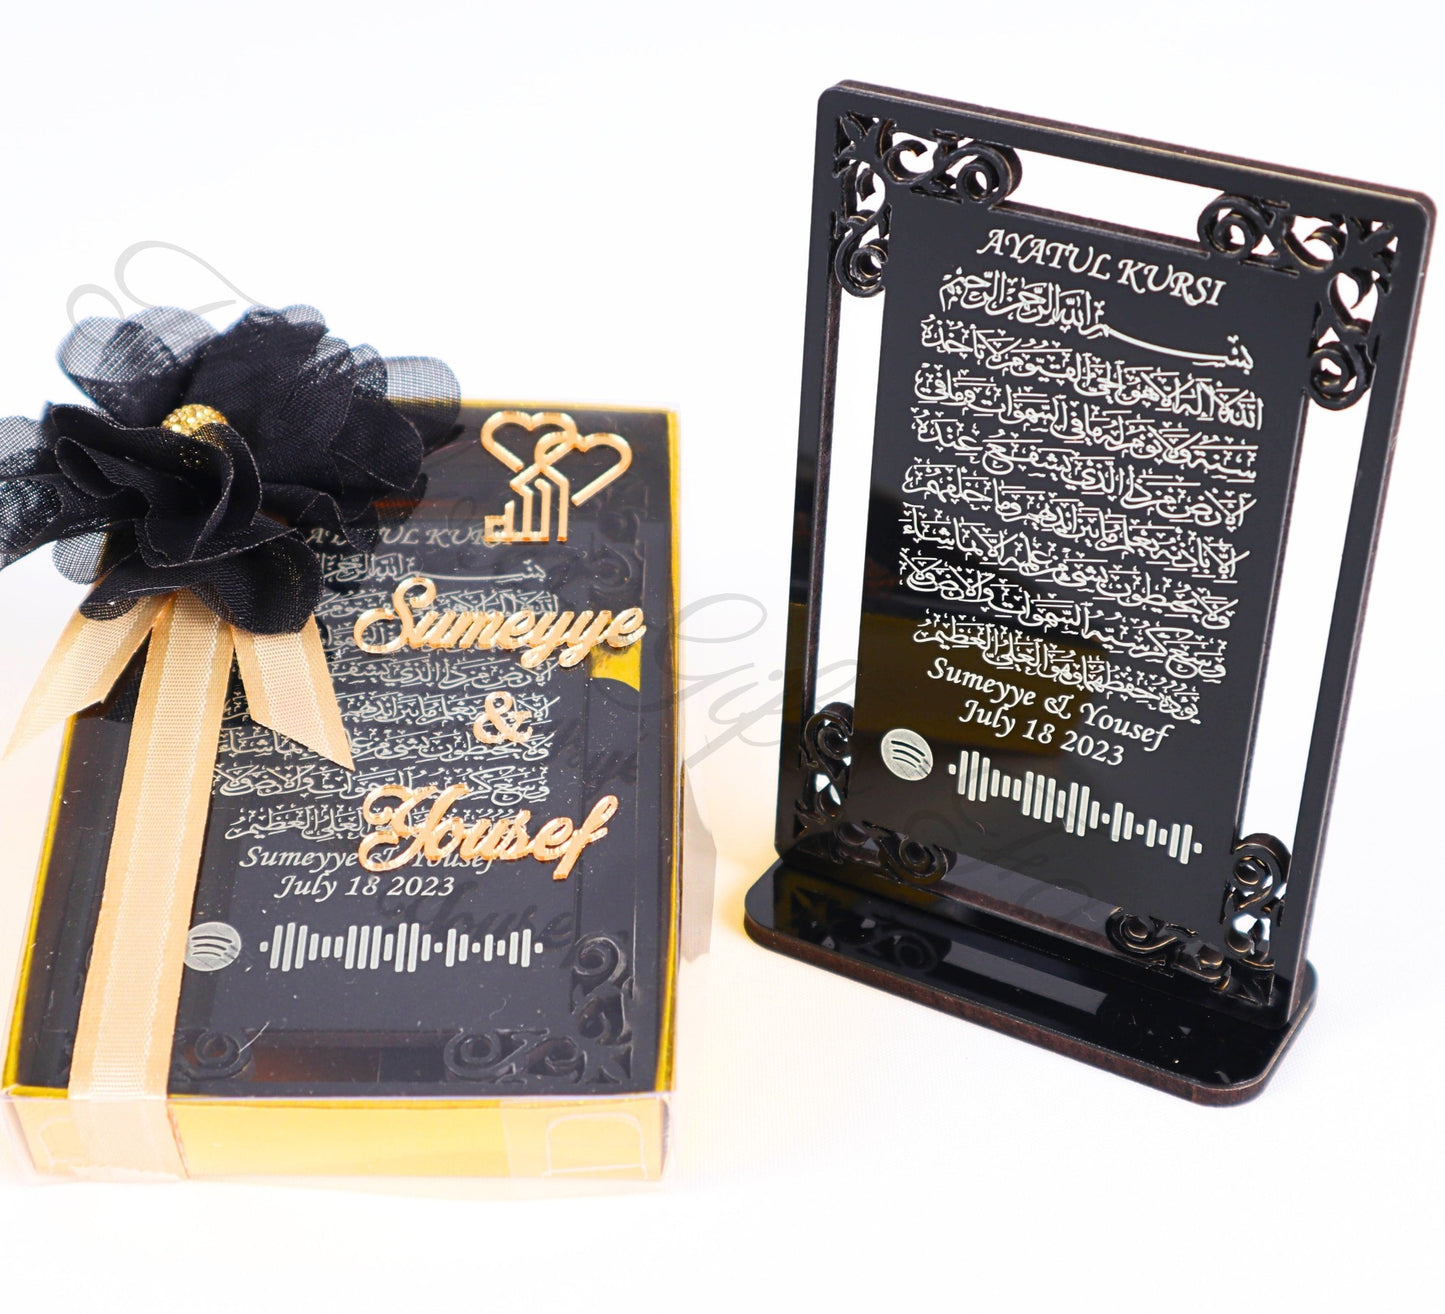 Personalized Wedding Favor Ayatul Kursi on Stand Gold Acrylic Mirror - Islamic Elite Favors is a handmade gift shop offering a wide variety of unique and personalized gifts for all occasions. Whether you're looking for the perfect Ramadan, Eid, Hajj, wedding gift or something special for a birthday, baby shower or anniversary, we have something for everyone. High quality, made with love.